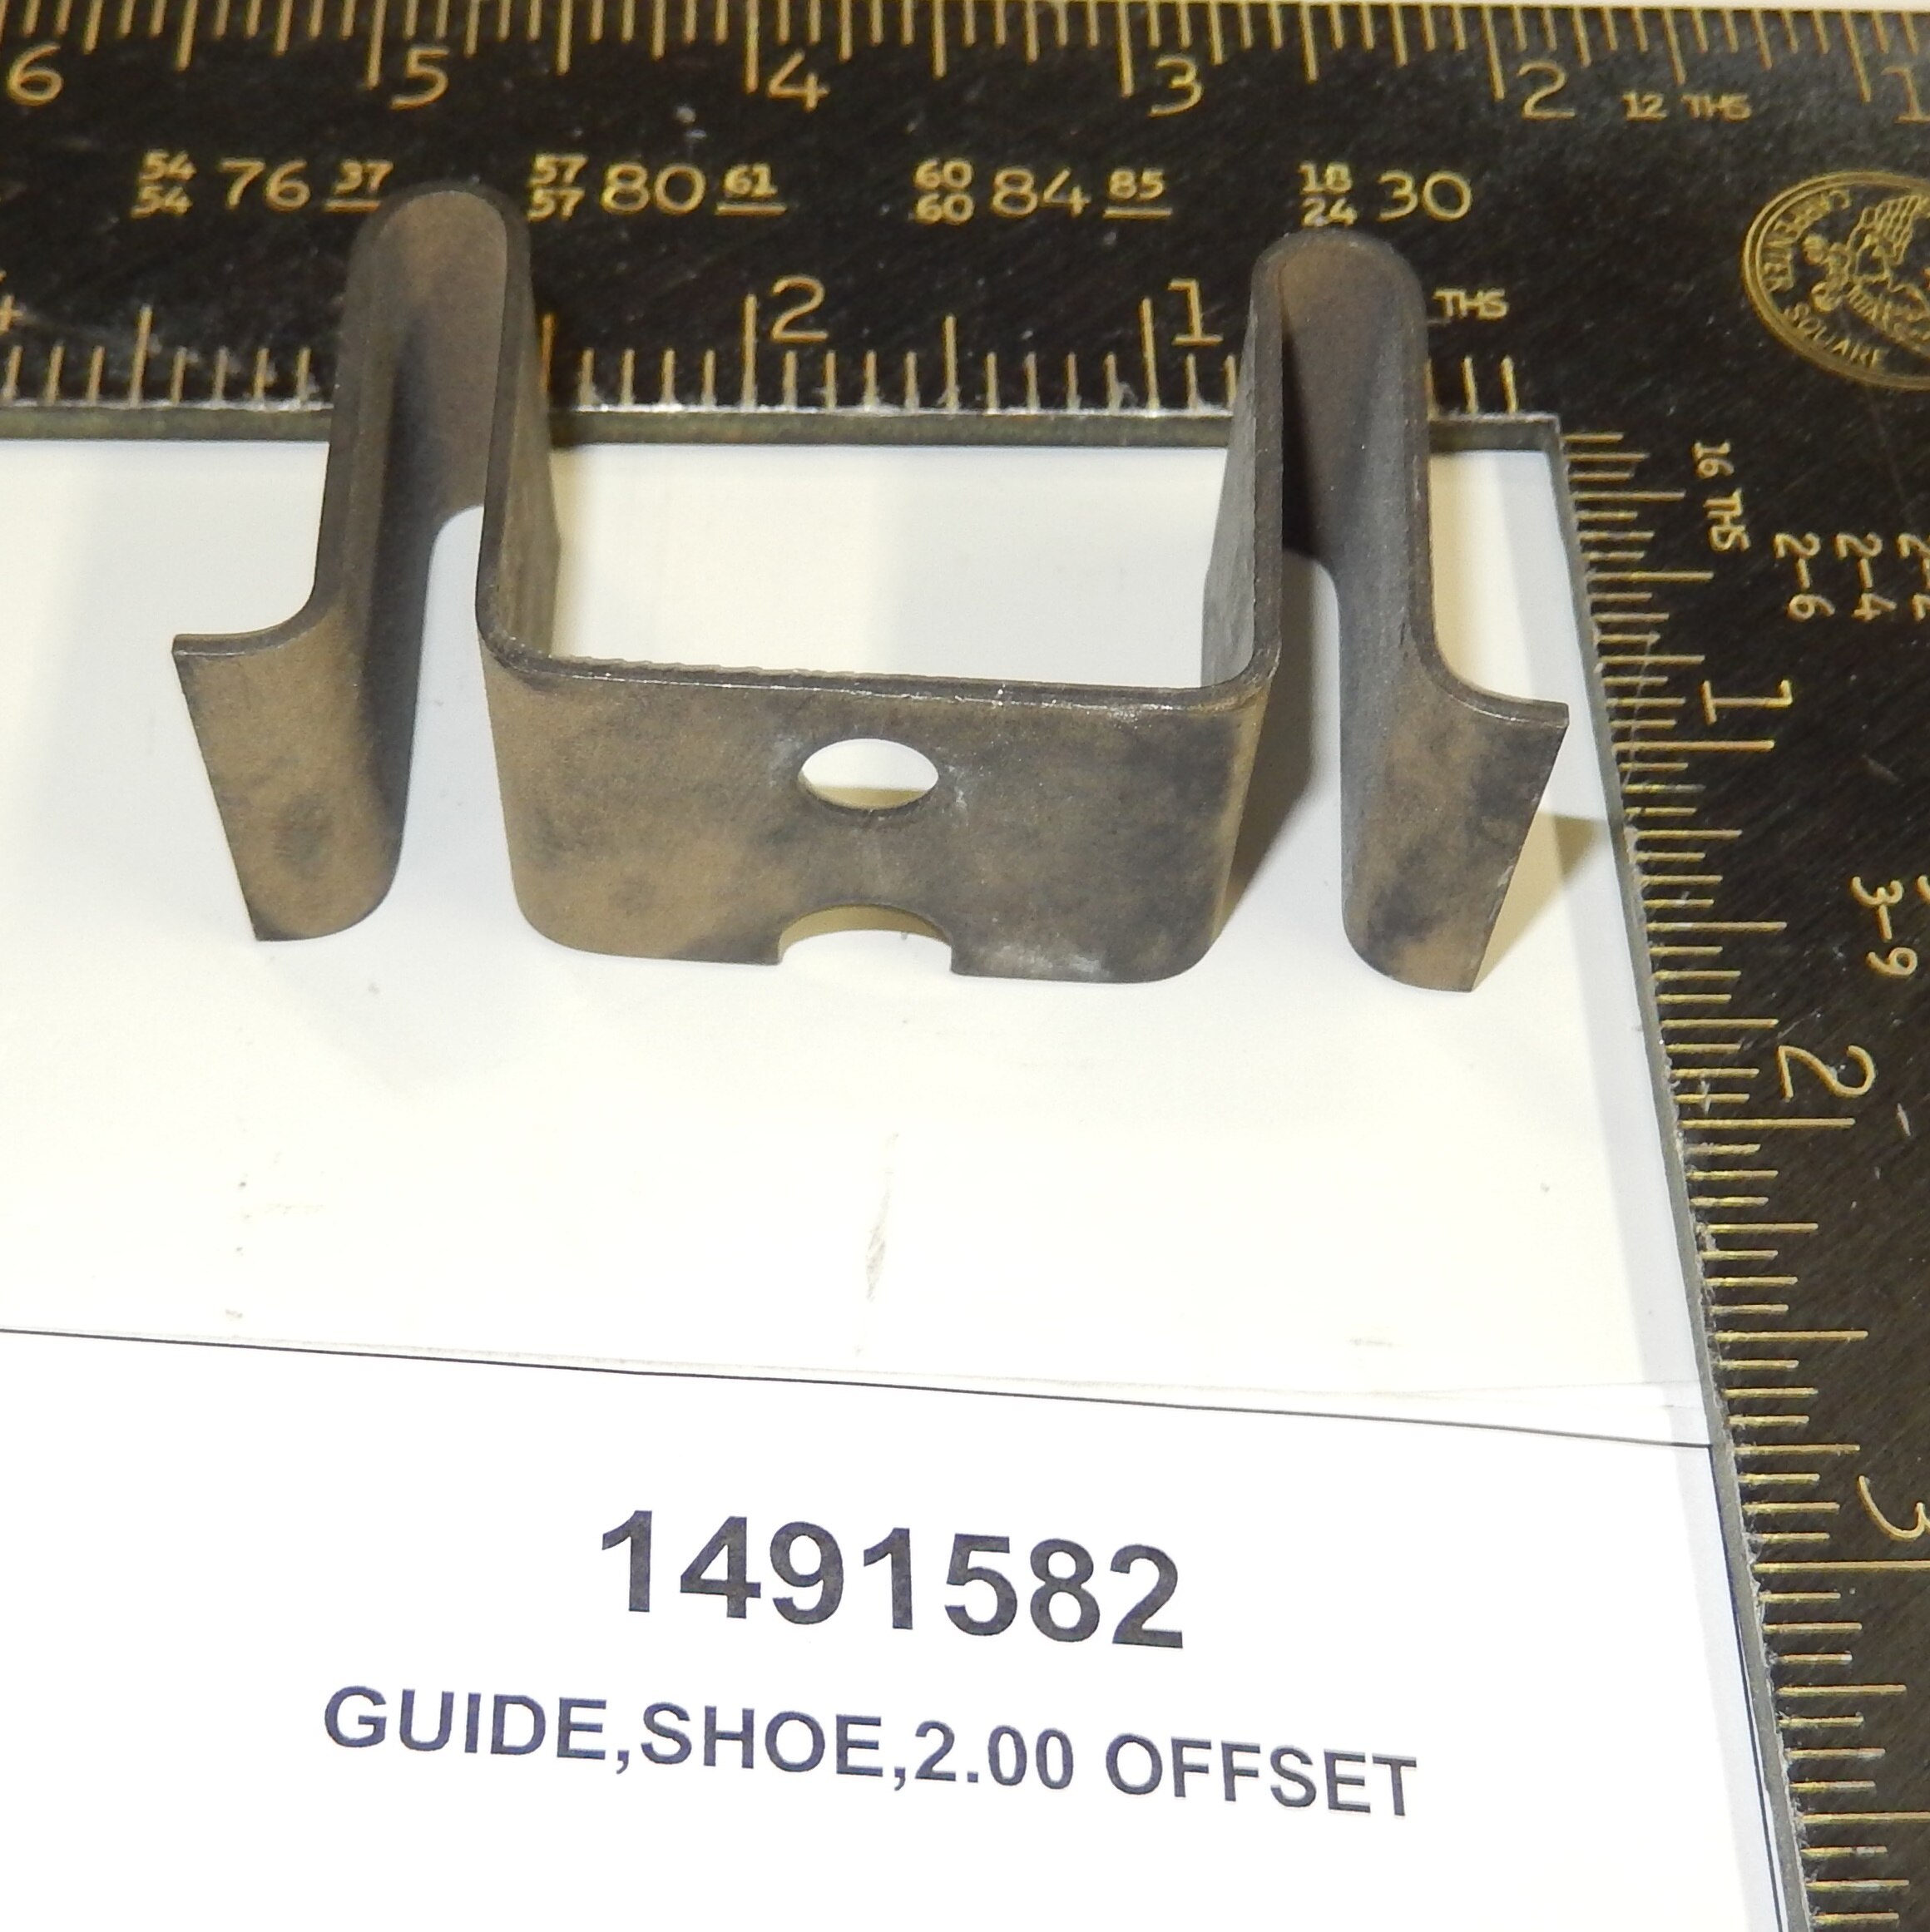 GUIDE,SHOE,2.00 OFFSET